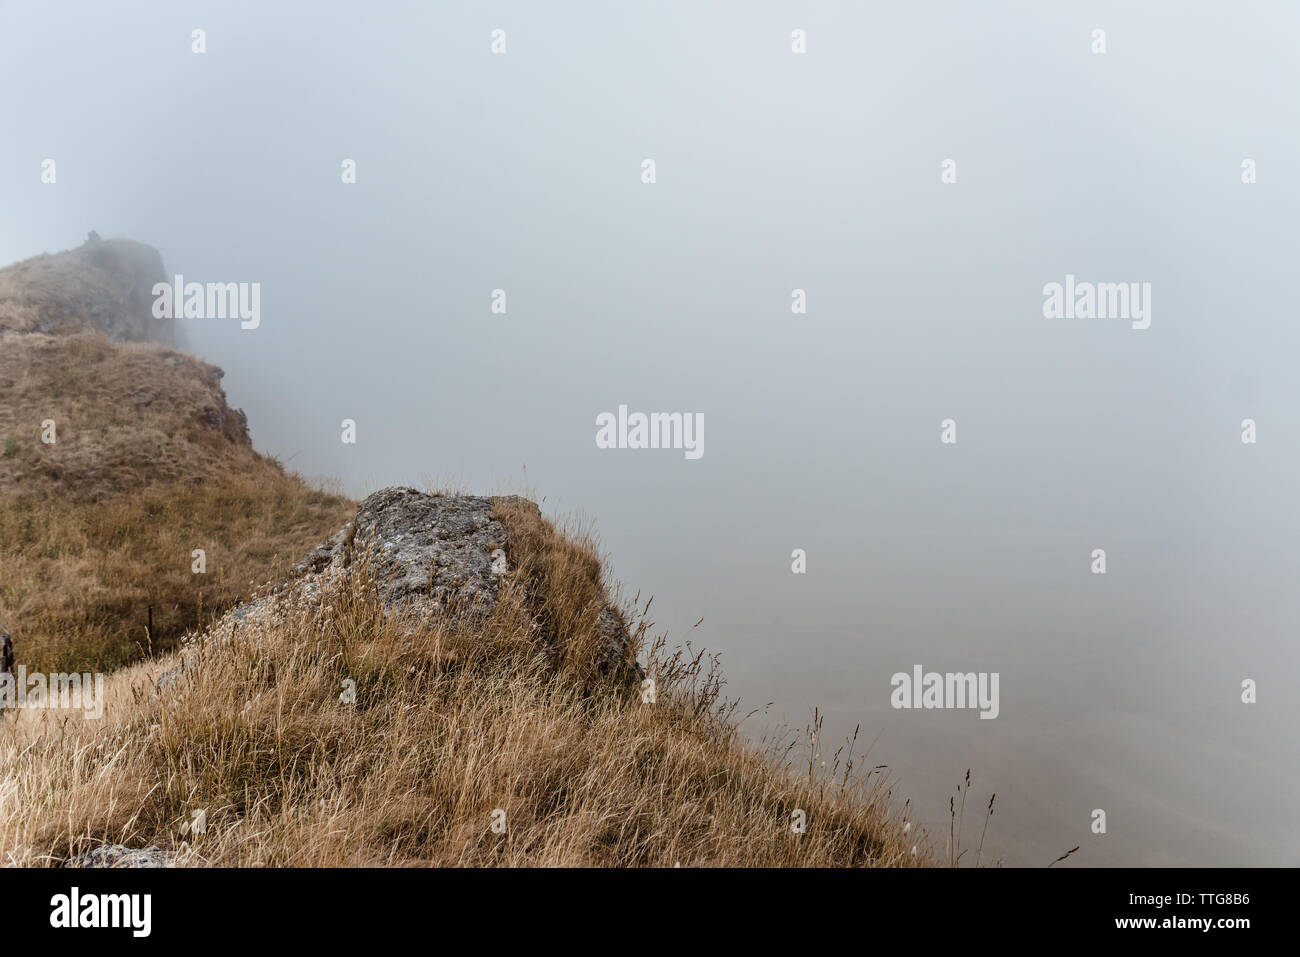 Landscape view of rocky cliff in the fog Stock Photo